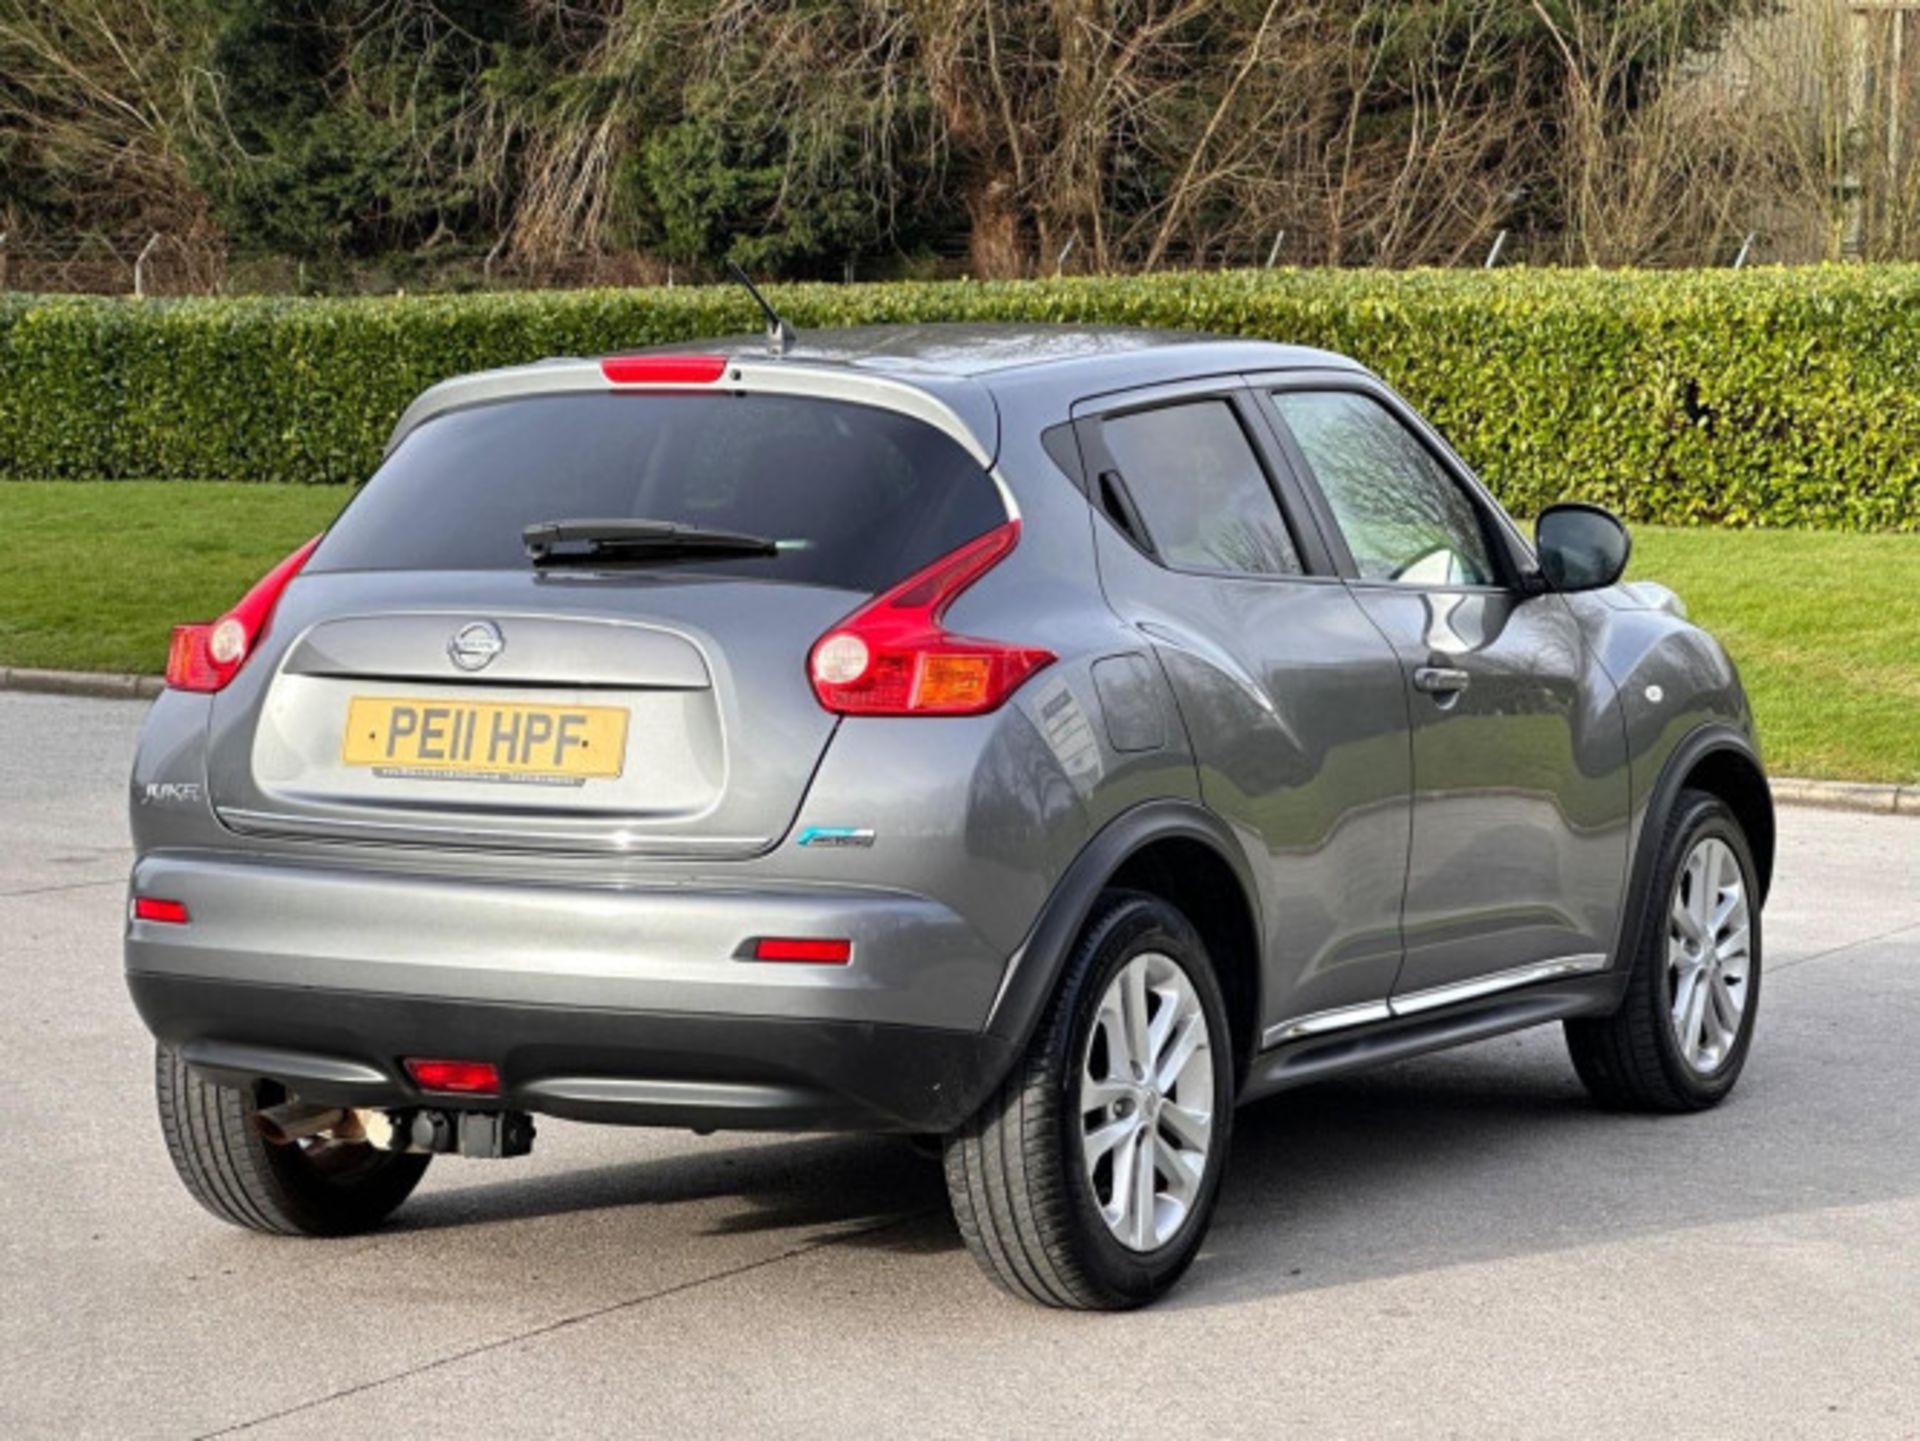 >>--NO VAT ON HAMMER--<< NISSAN JUKE 1.5 DCI ACENTA SPORT: A PRACTICAL AND SPORTY SUV - Image 65 of 66